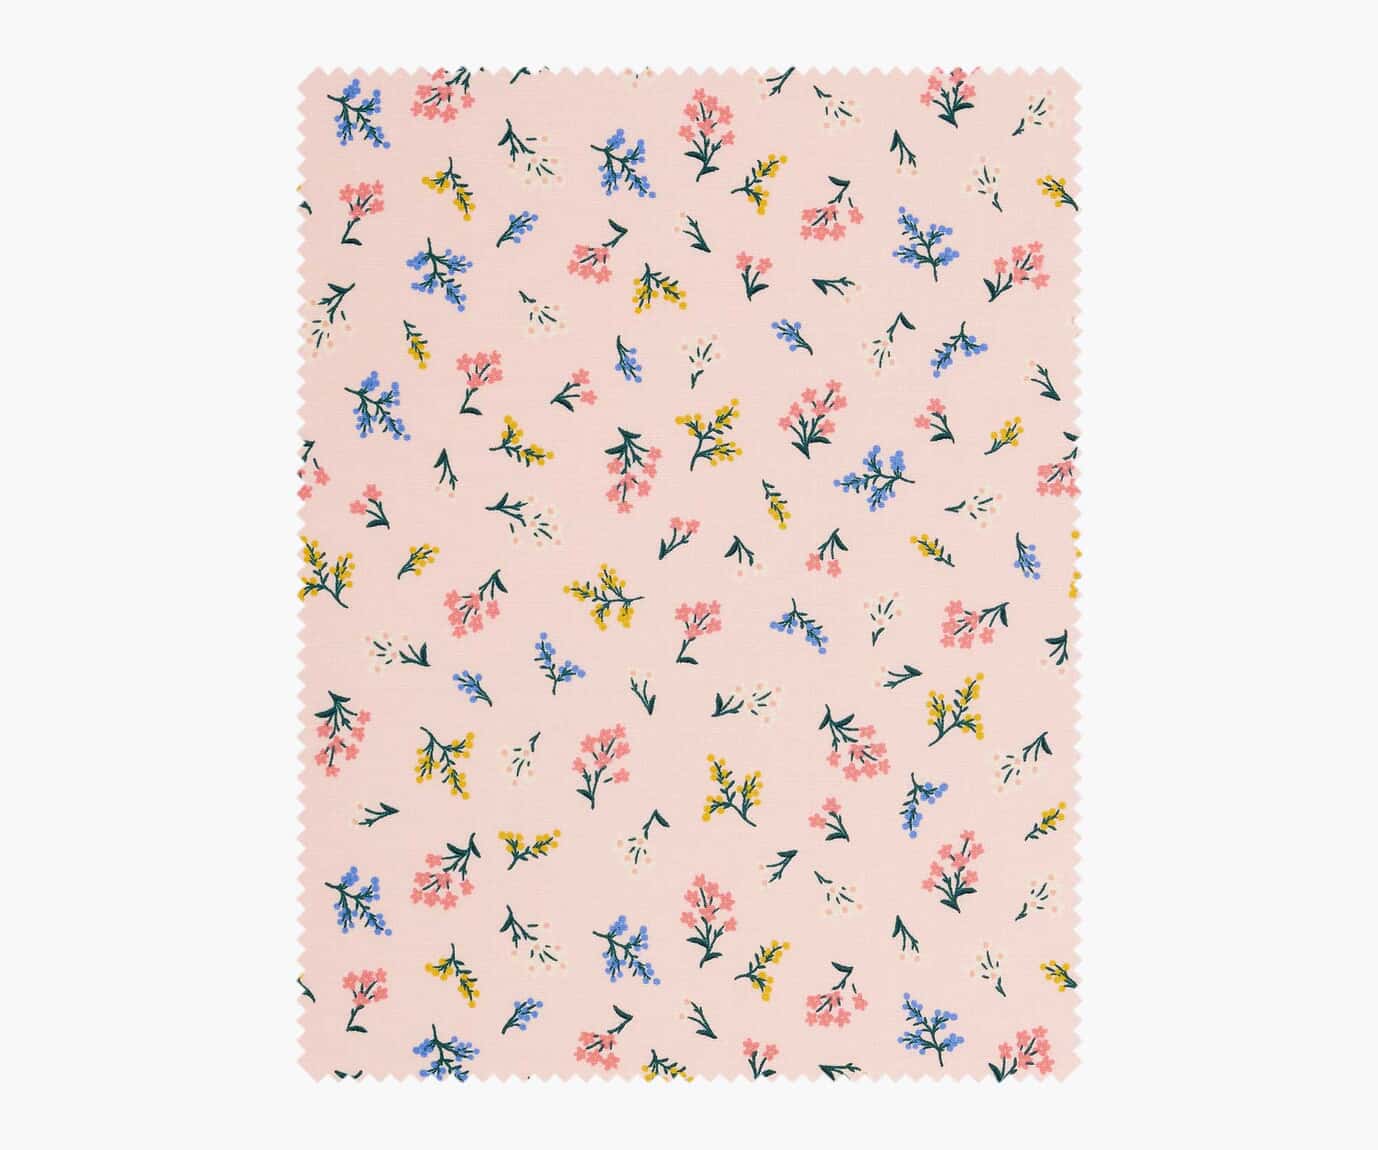 REMNANT 2.33 Metres - Rifle Paper Co - Petites Fleurs Blush Cotton from Strawberry Fields